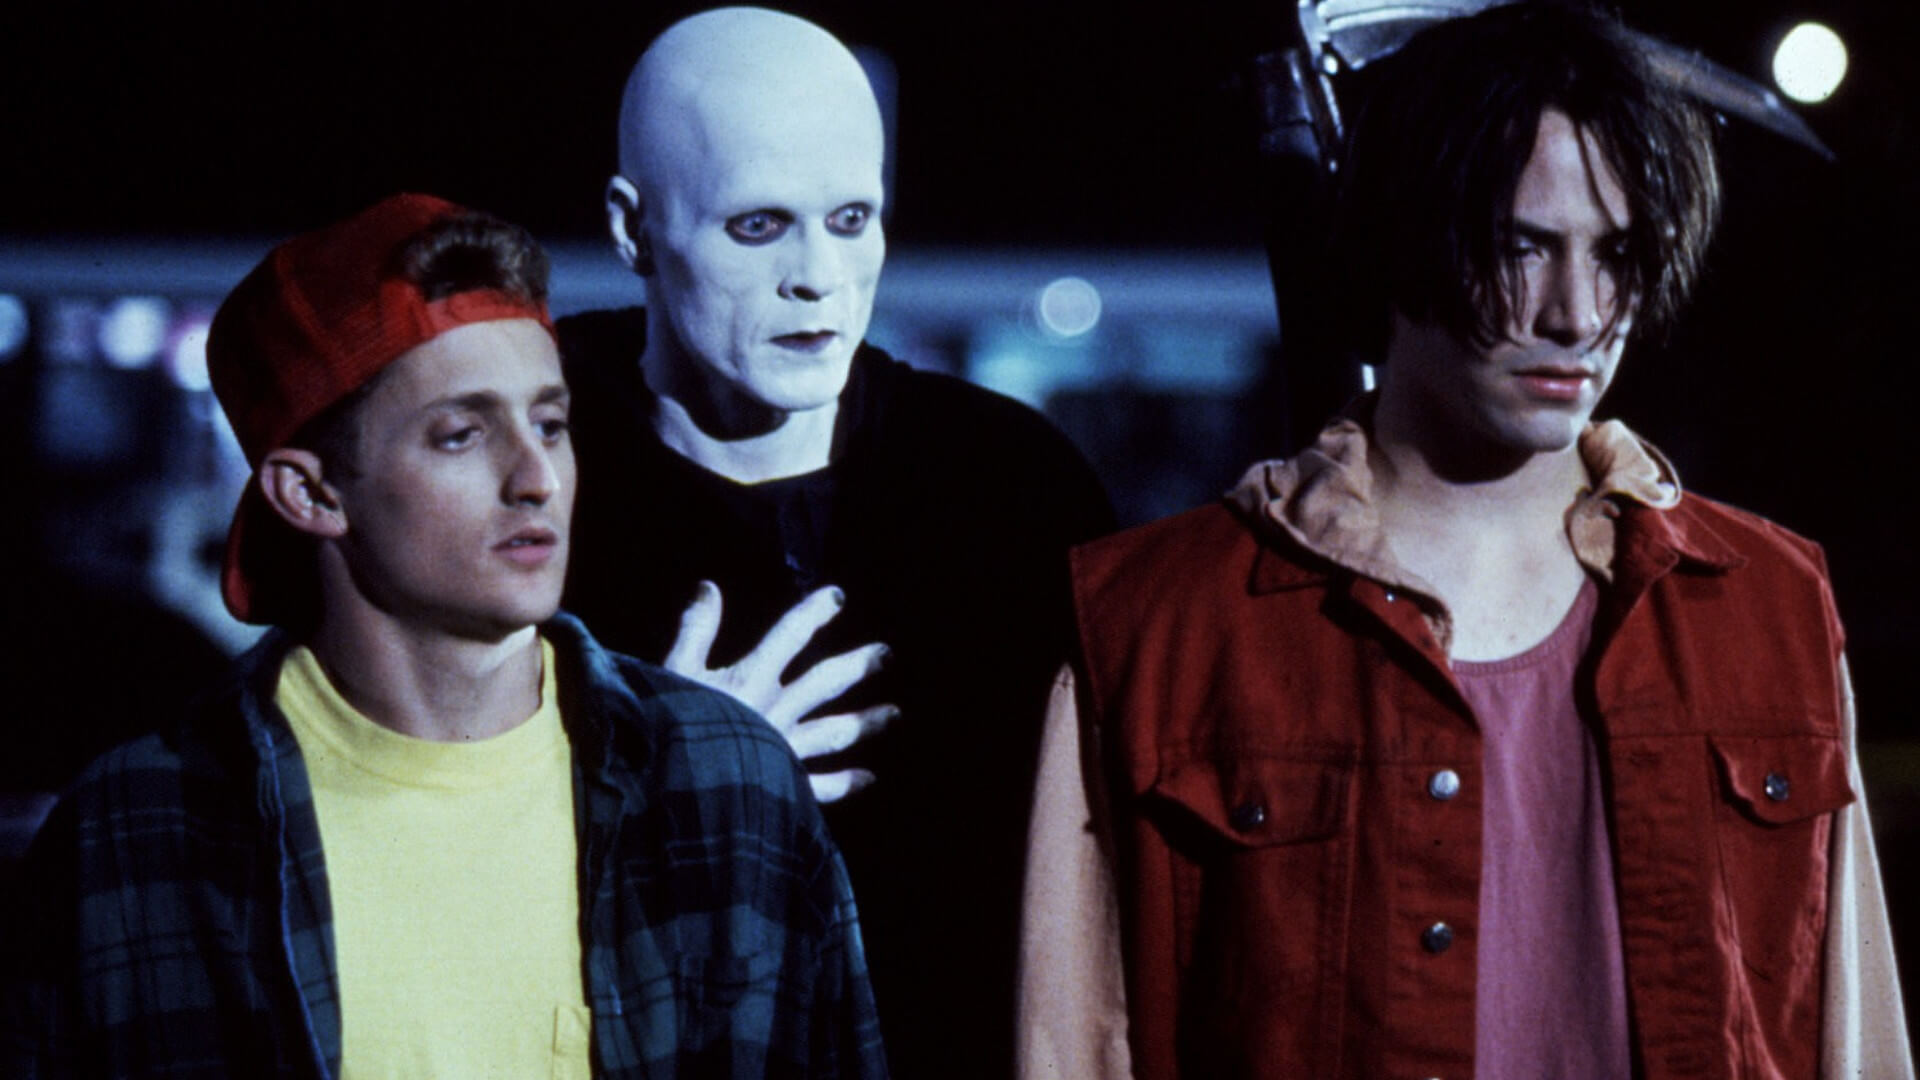 Bill & Ted Death